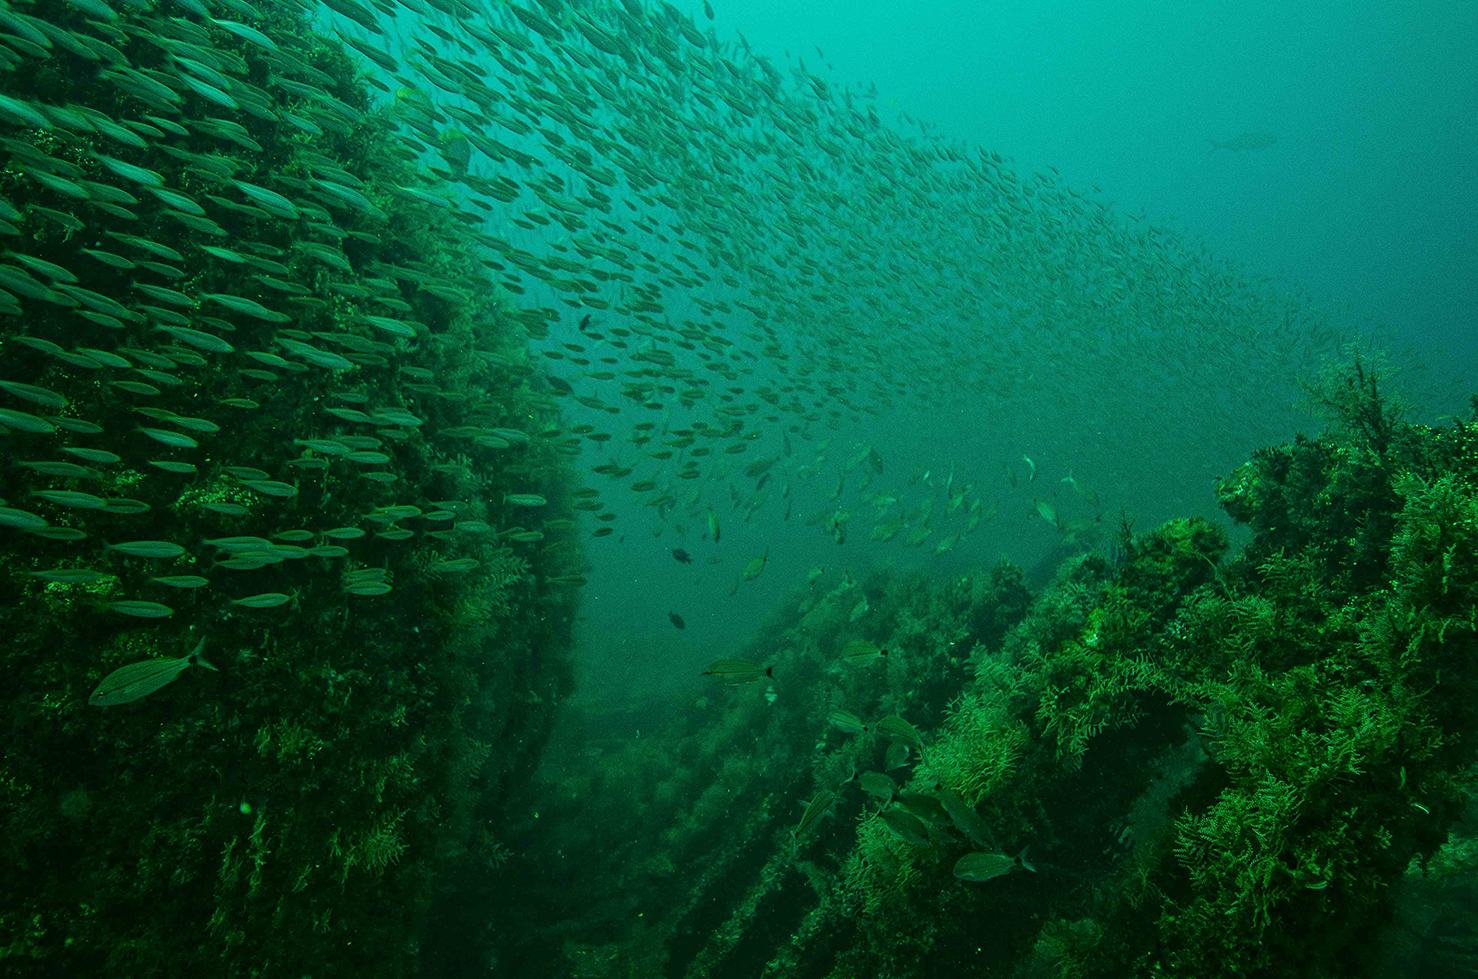 Schools of fish swim among hydroids through the ribs of the sunken 'Russian Freighter' artificial reef off Pensacola, Florida.